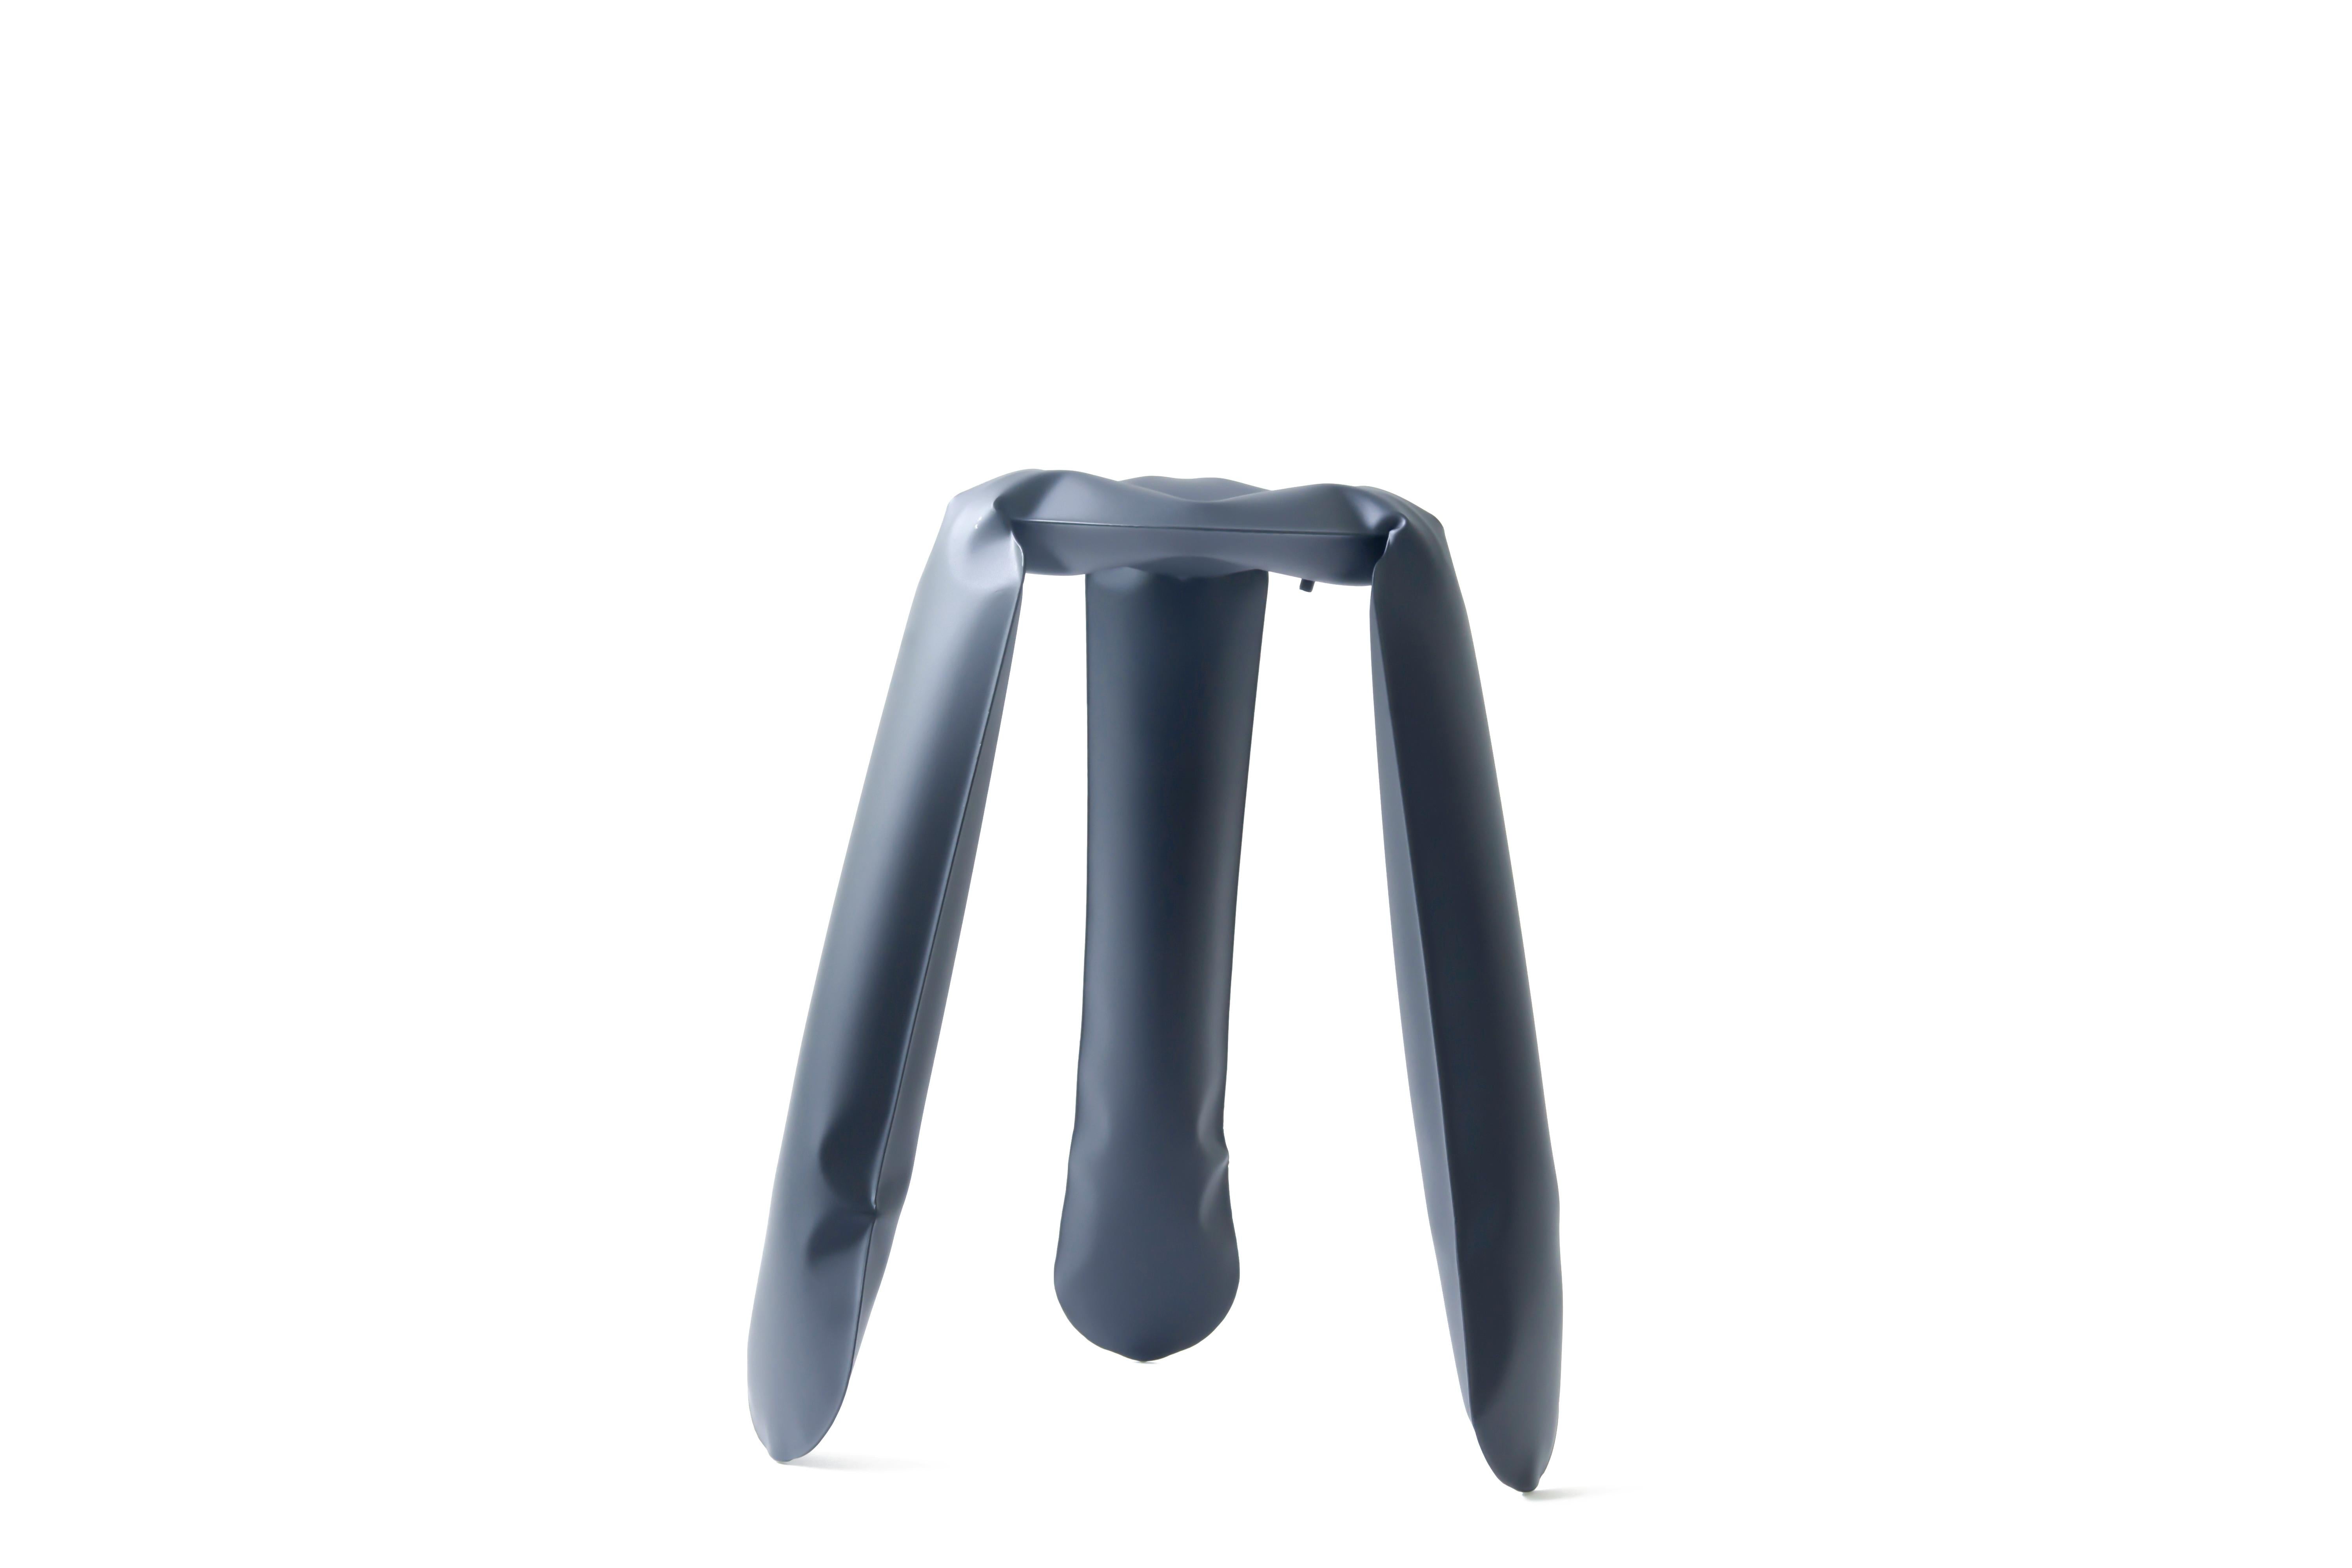 Graphite Steel Kitchen Plopp stool by Zieta
Dimensions: D 35 x H 65 cm 
Material: Carbon steel. 
Finish: Powder-coated. 
Available in colors: Beige, black, blue, graphite, moss, umbra gray, and flamed gold. Available in Stainless Steel, Aluminum,